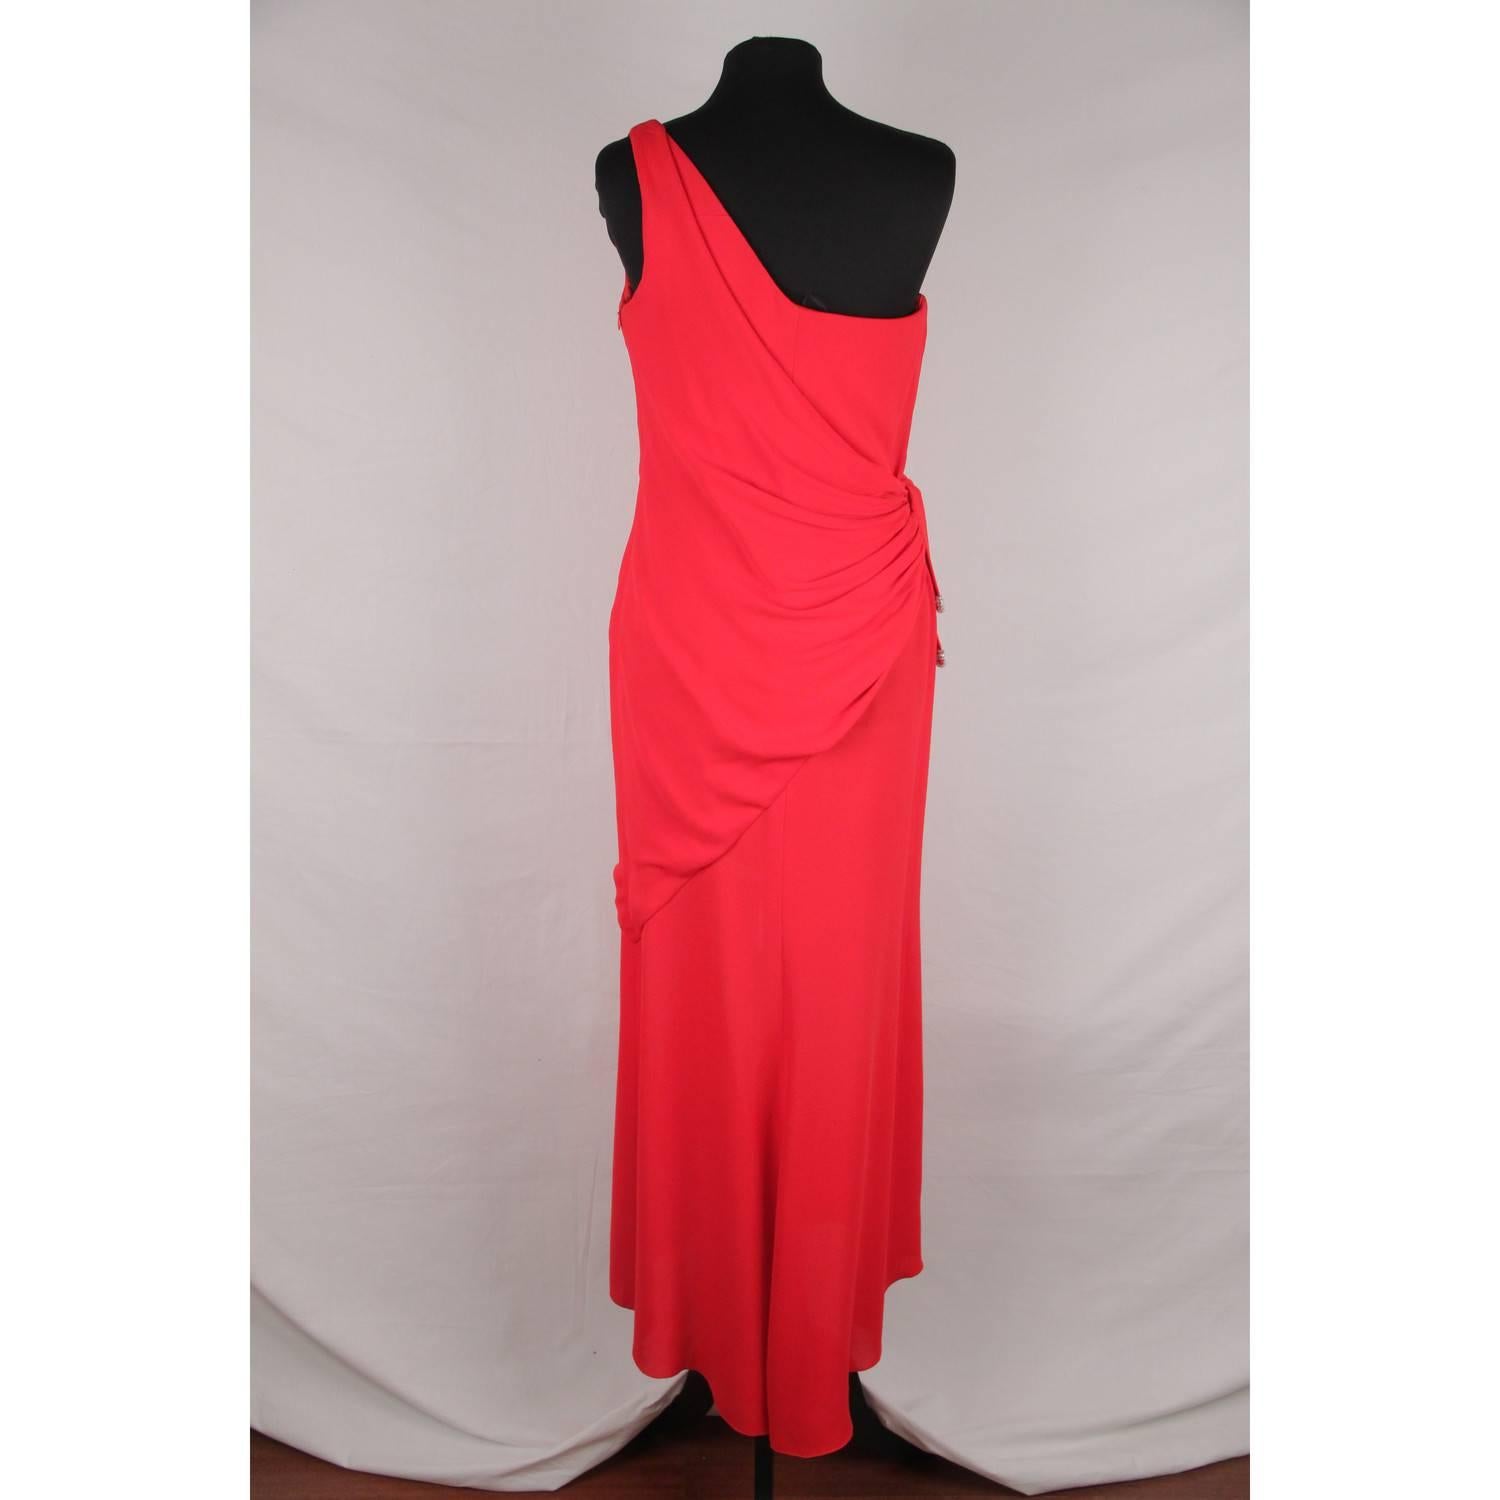 VALENTINO Red Chiffon ONE SHOULDER EVENING Gown DRESS Gown 1